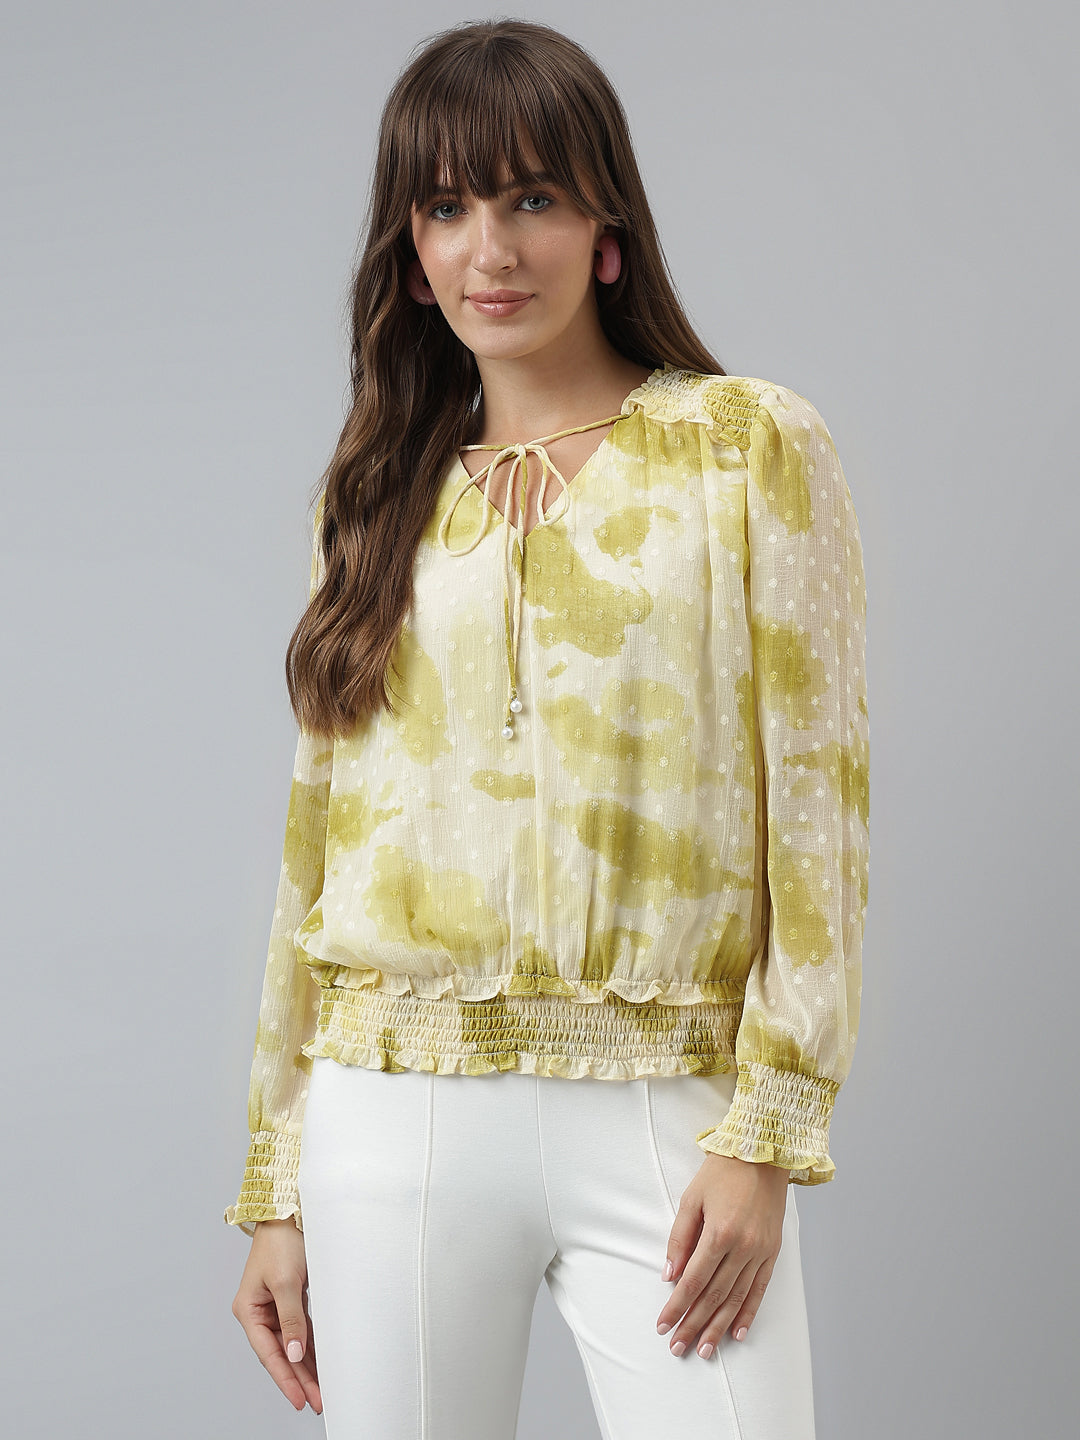 Printed Top Casual Full Sleeves Yellow Top